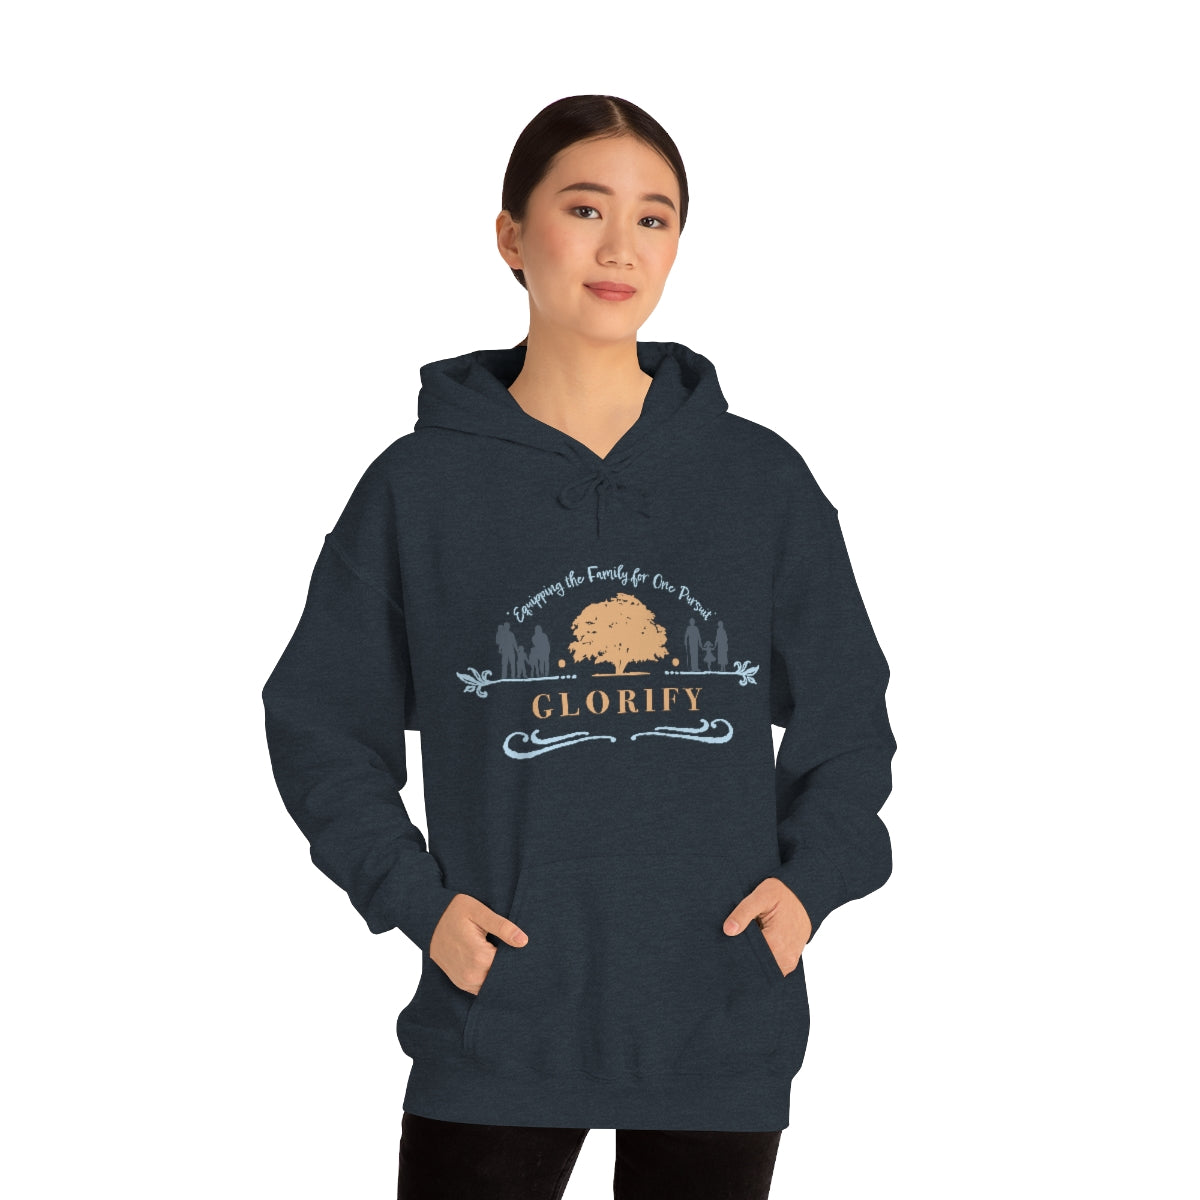 Equipping the Family Hooded Sweatshirt